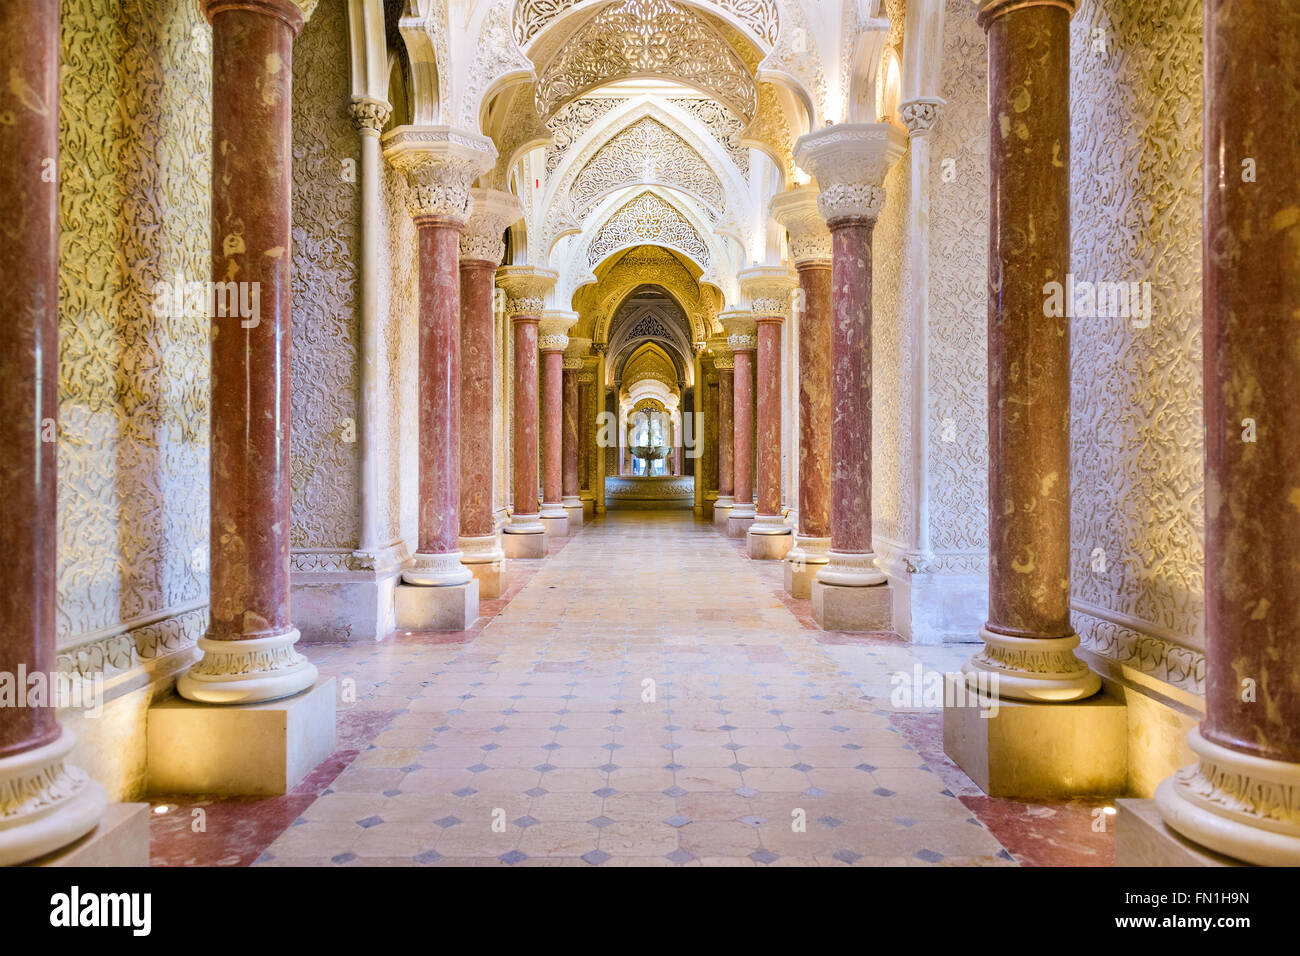 Monserrate Palace Interieur in Sintra, Portugal. Stockfoto